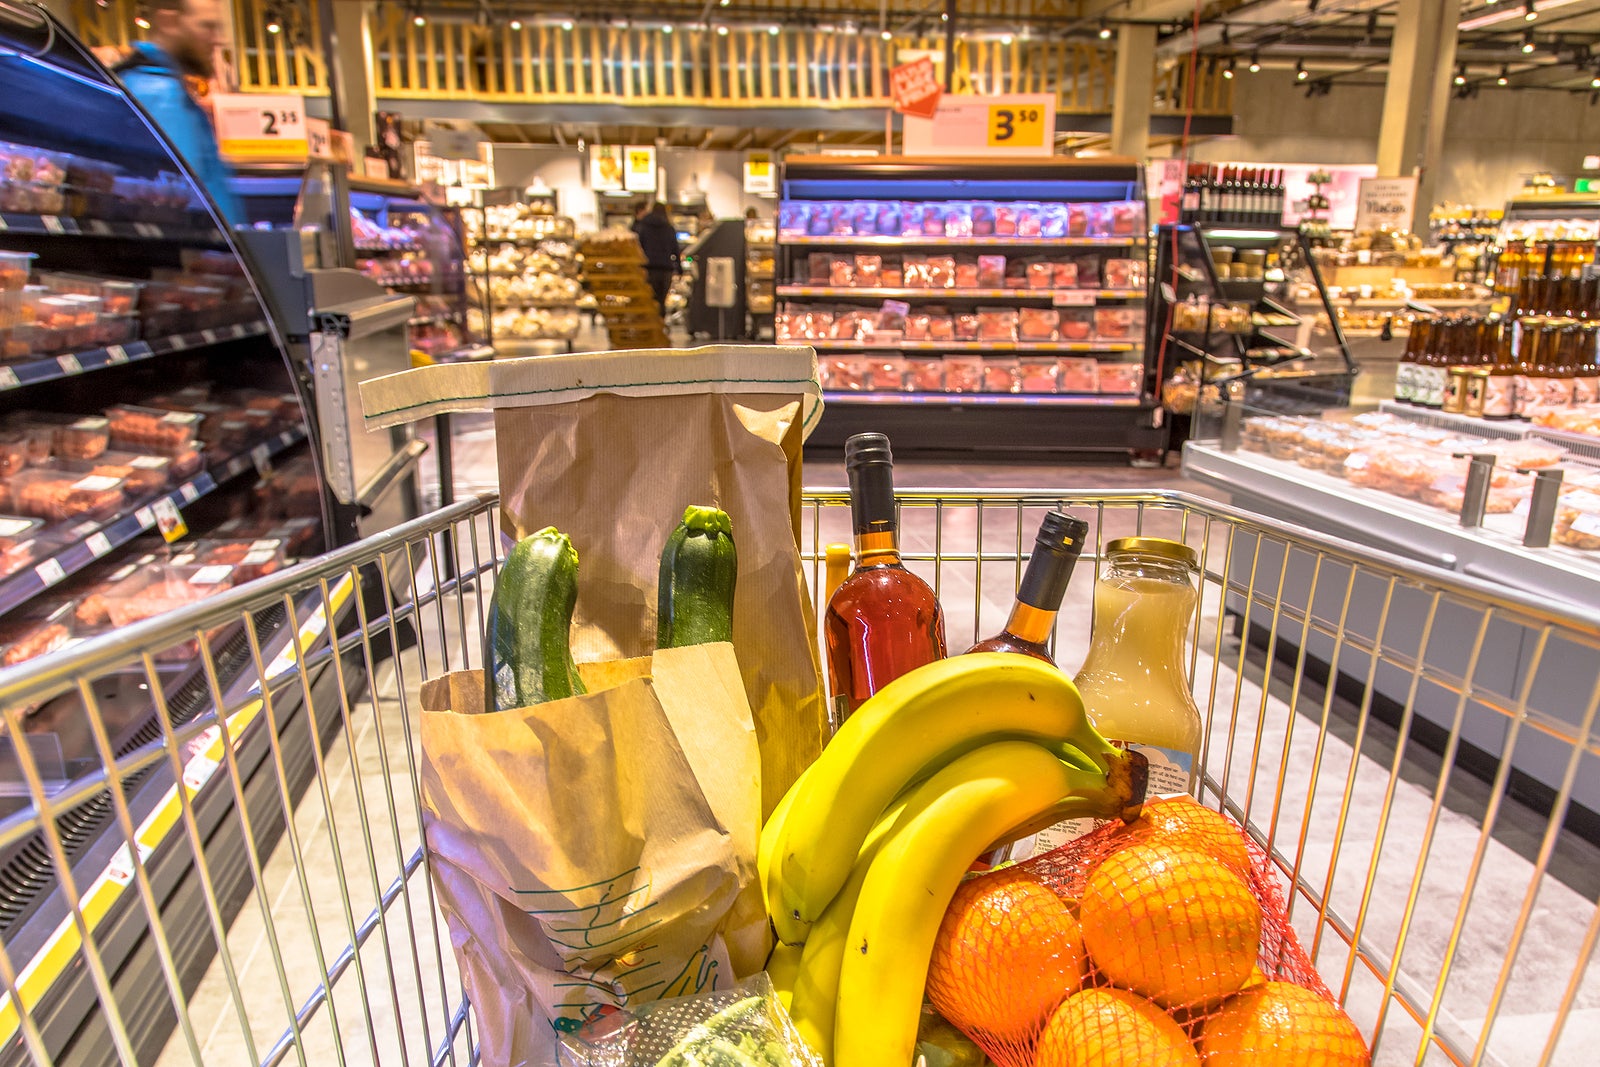 Grocery cart in supermarket filled with food products seen from the customers point of view